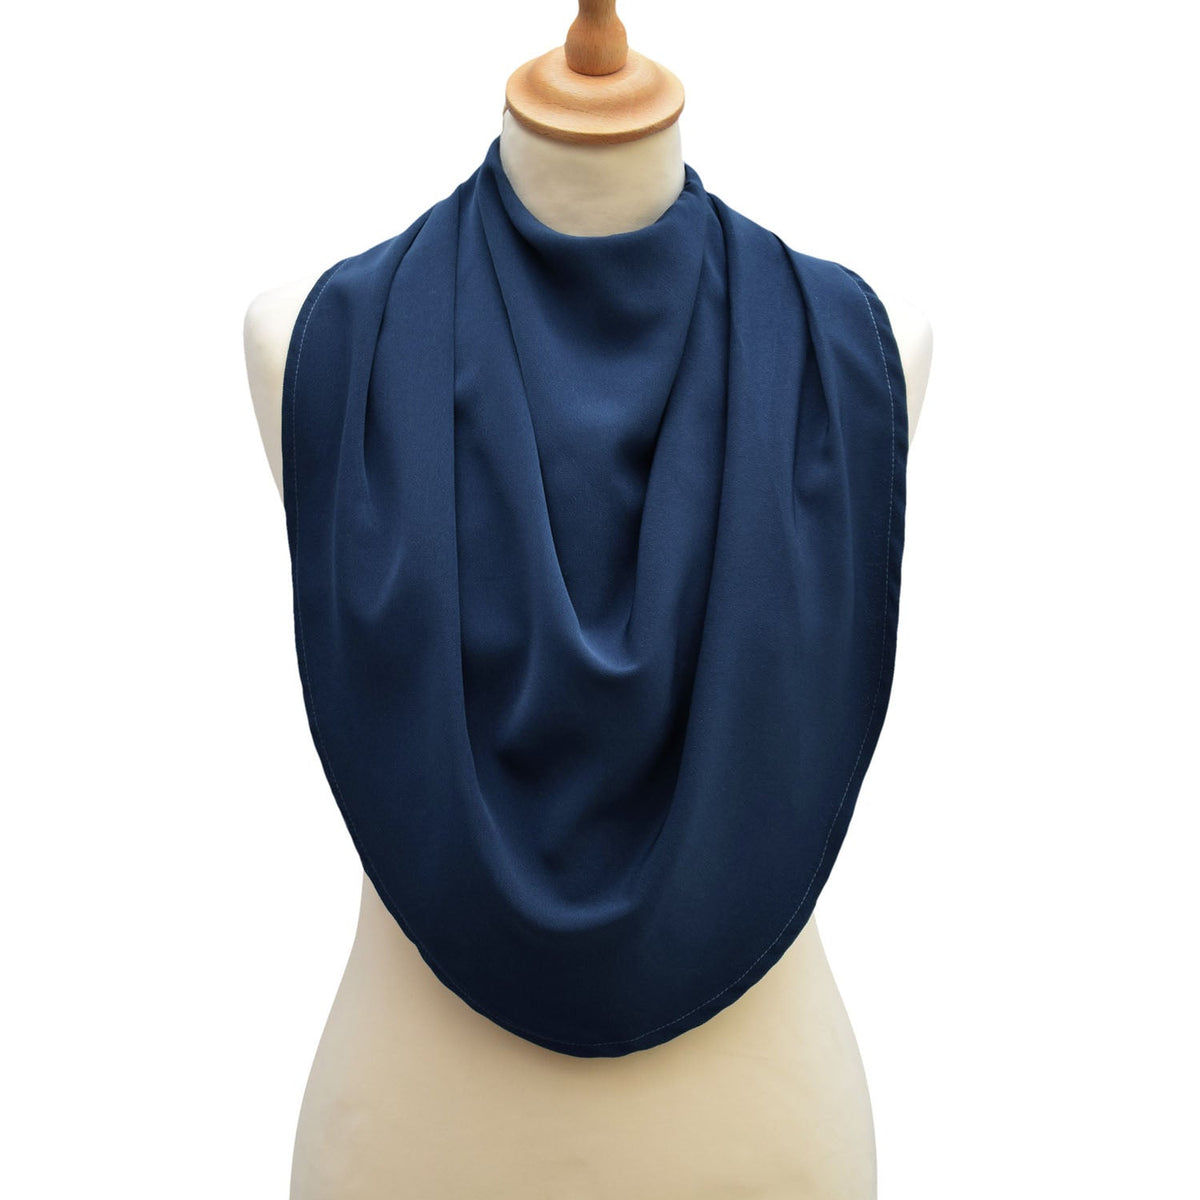 Pashmina scarf style clothing protector - Navy (UK VAT Exempt) | Health Care | Care Designs